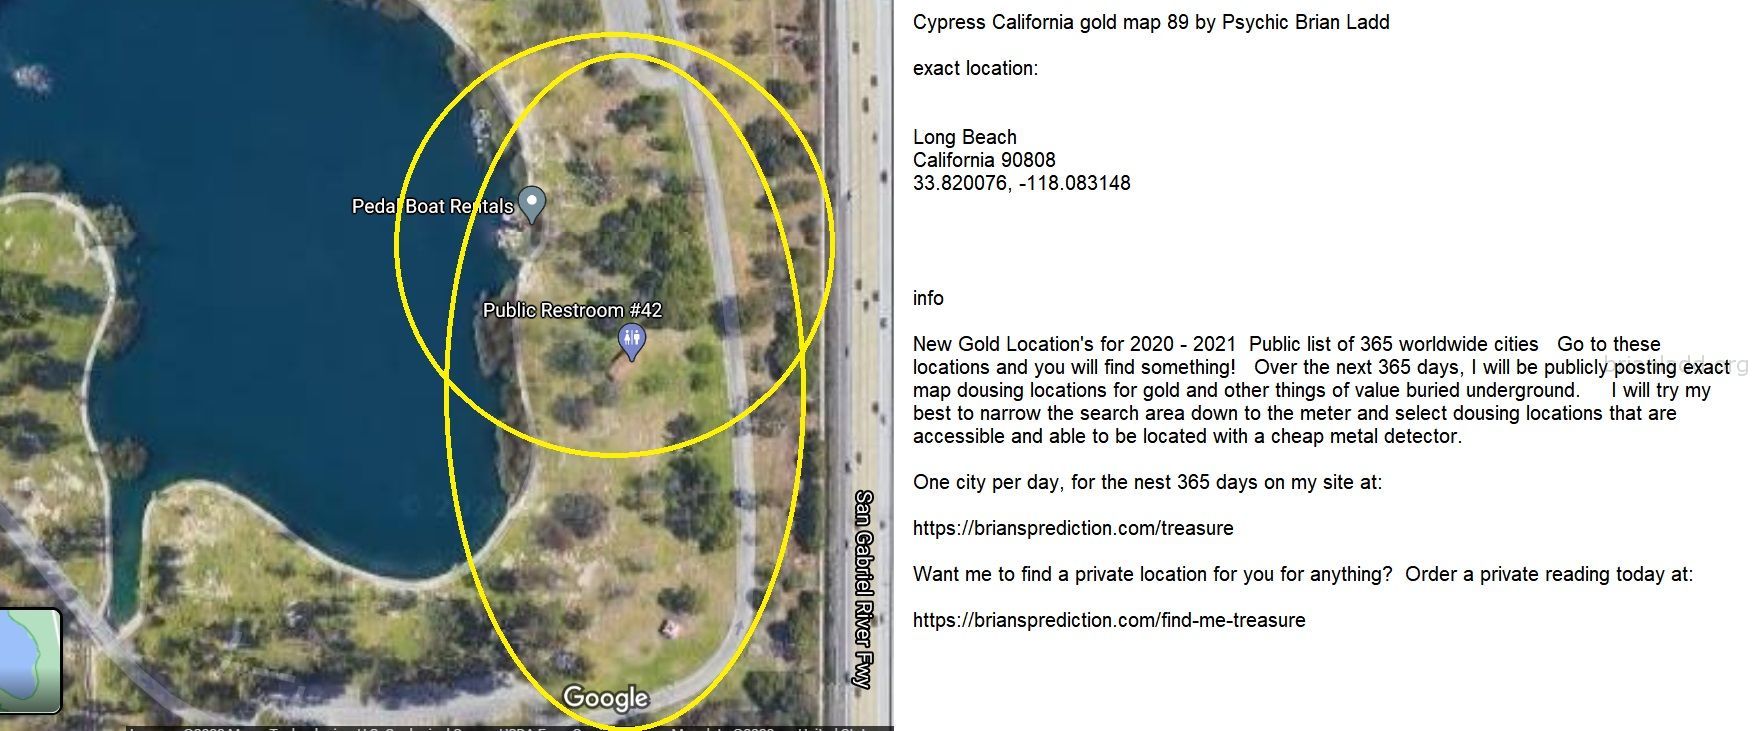 Cypress California gold map 89 by Psychic Brian Ladd
New Gold Location's for 2020 - 2021  Public list of 365 worldwide cities   Go to these locations and you will find something!   Over the next 365 days, I will be publicly posting exact map dousing locations for gold and other things of value buried underground.     I will try my best to narrow the search area down to the meter and select dousing locations that are accessible and able to be located with a cheap metal detector. One city per day, for the nest 365 days on my site at:  https://briansprediction.com/treasure  Want me to find a private location for you for anything?  Order a private reading today at:  https://briansprediction.com/find-me-treasure
